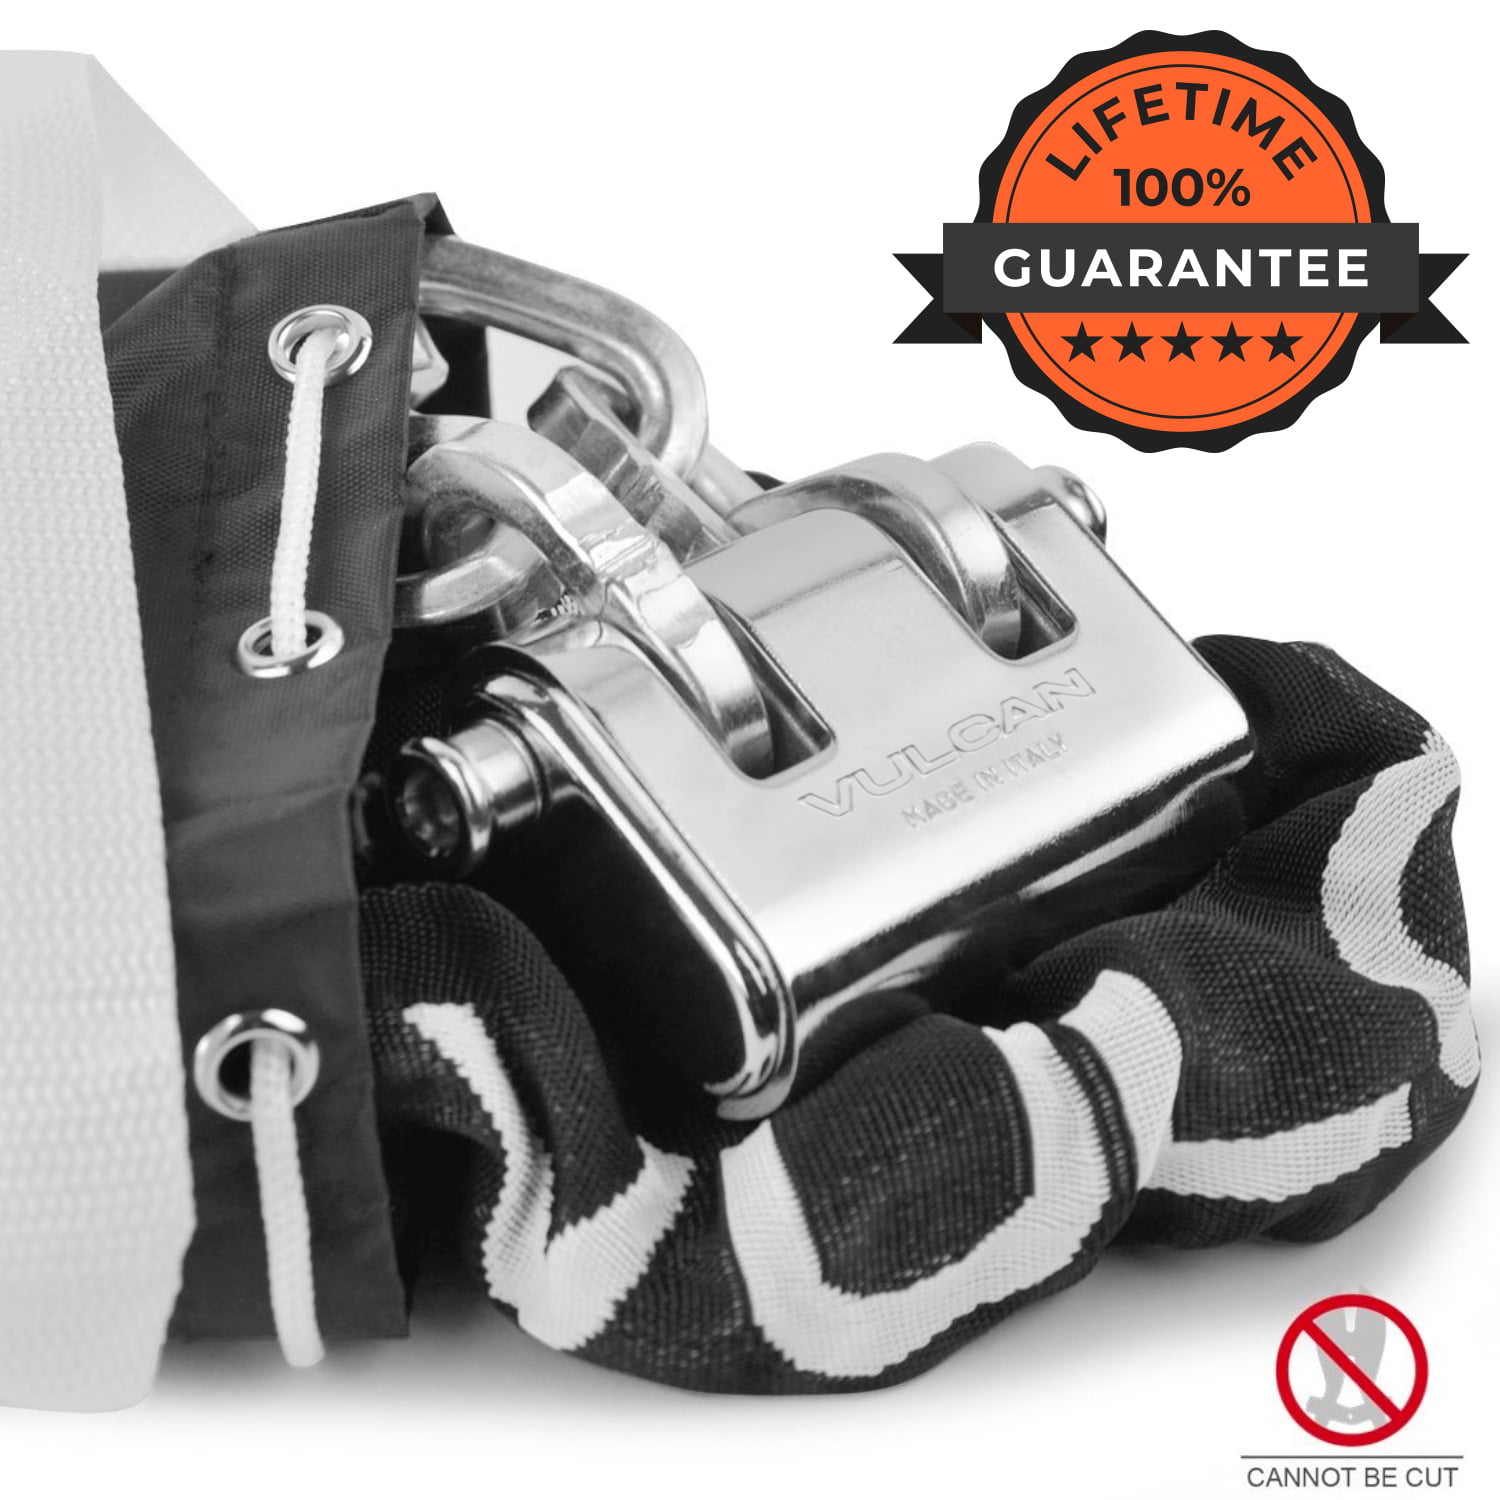 Cannot Be Cut With Bolt Cutters Or Hand Tools Vulcan Premium Case-Hardened Security Chain And Lock Kit 3/8 x 6 Chain Nearly Impossible To Defeat 